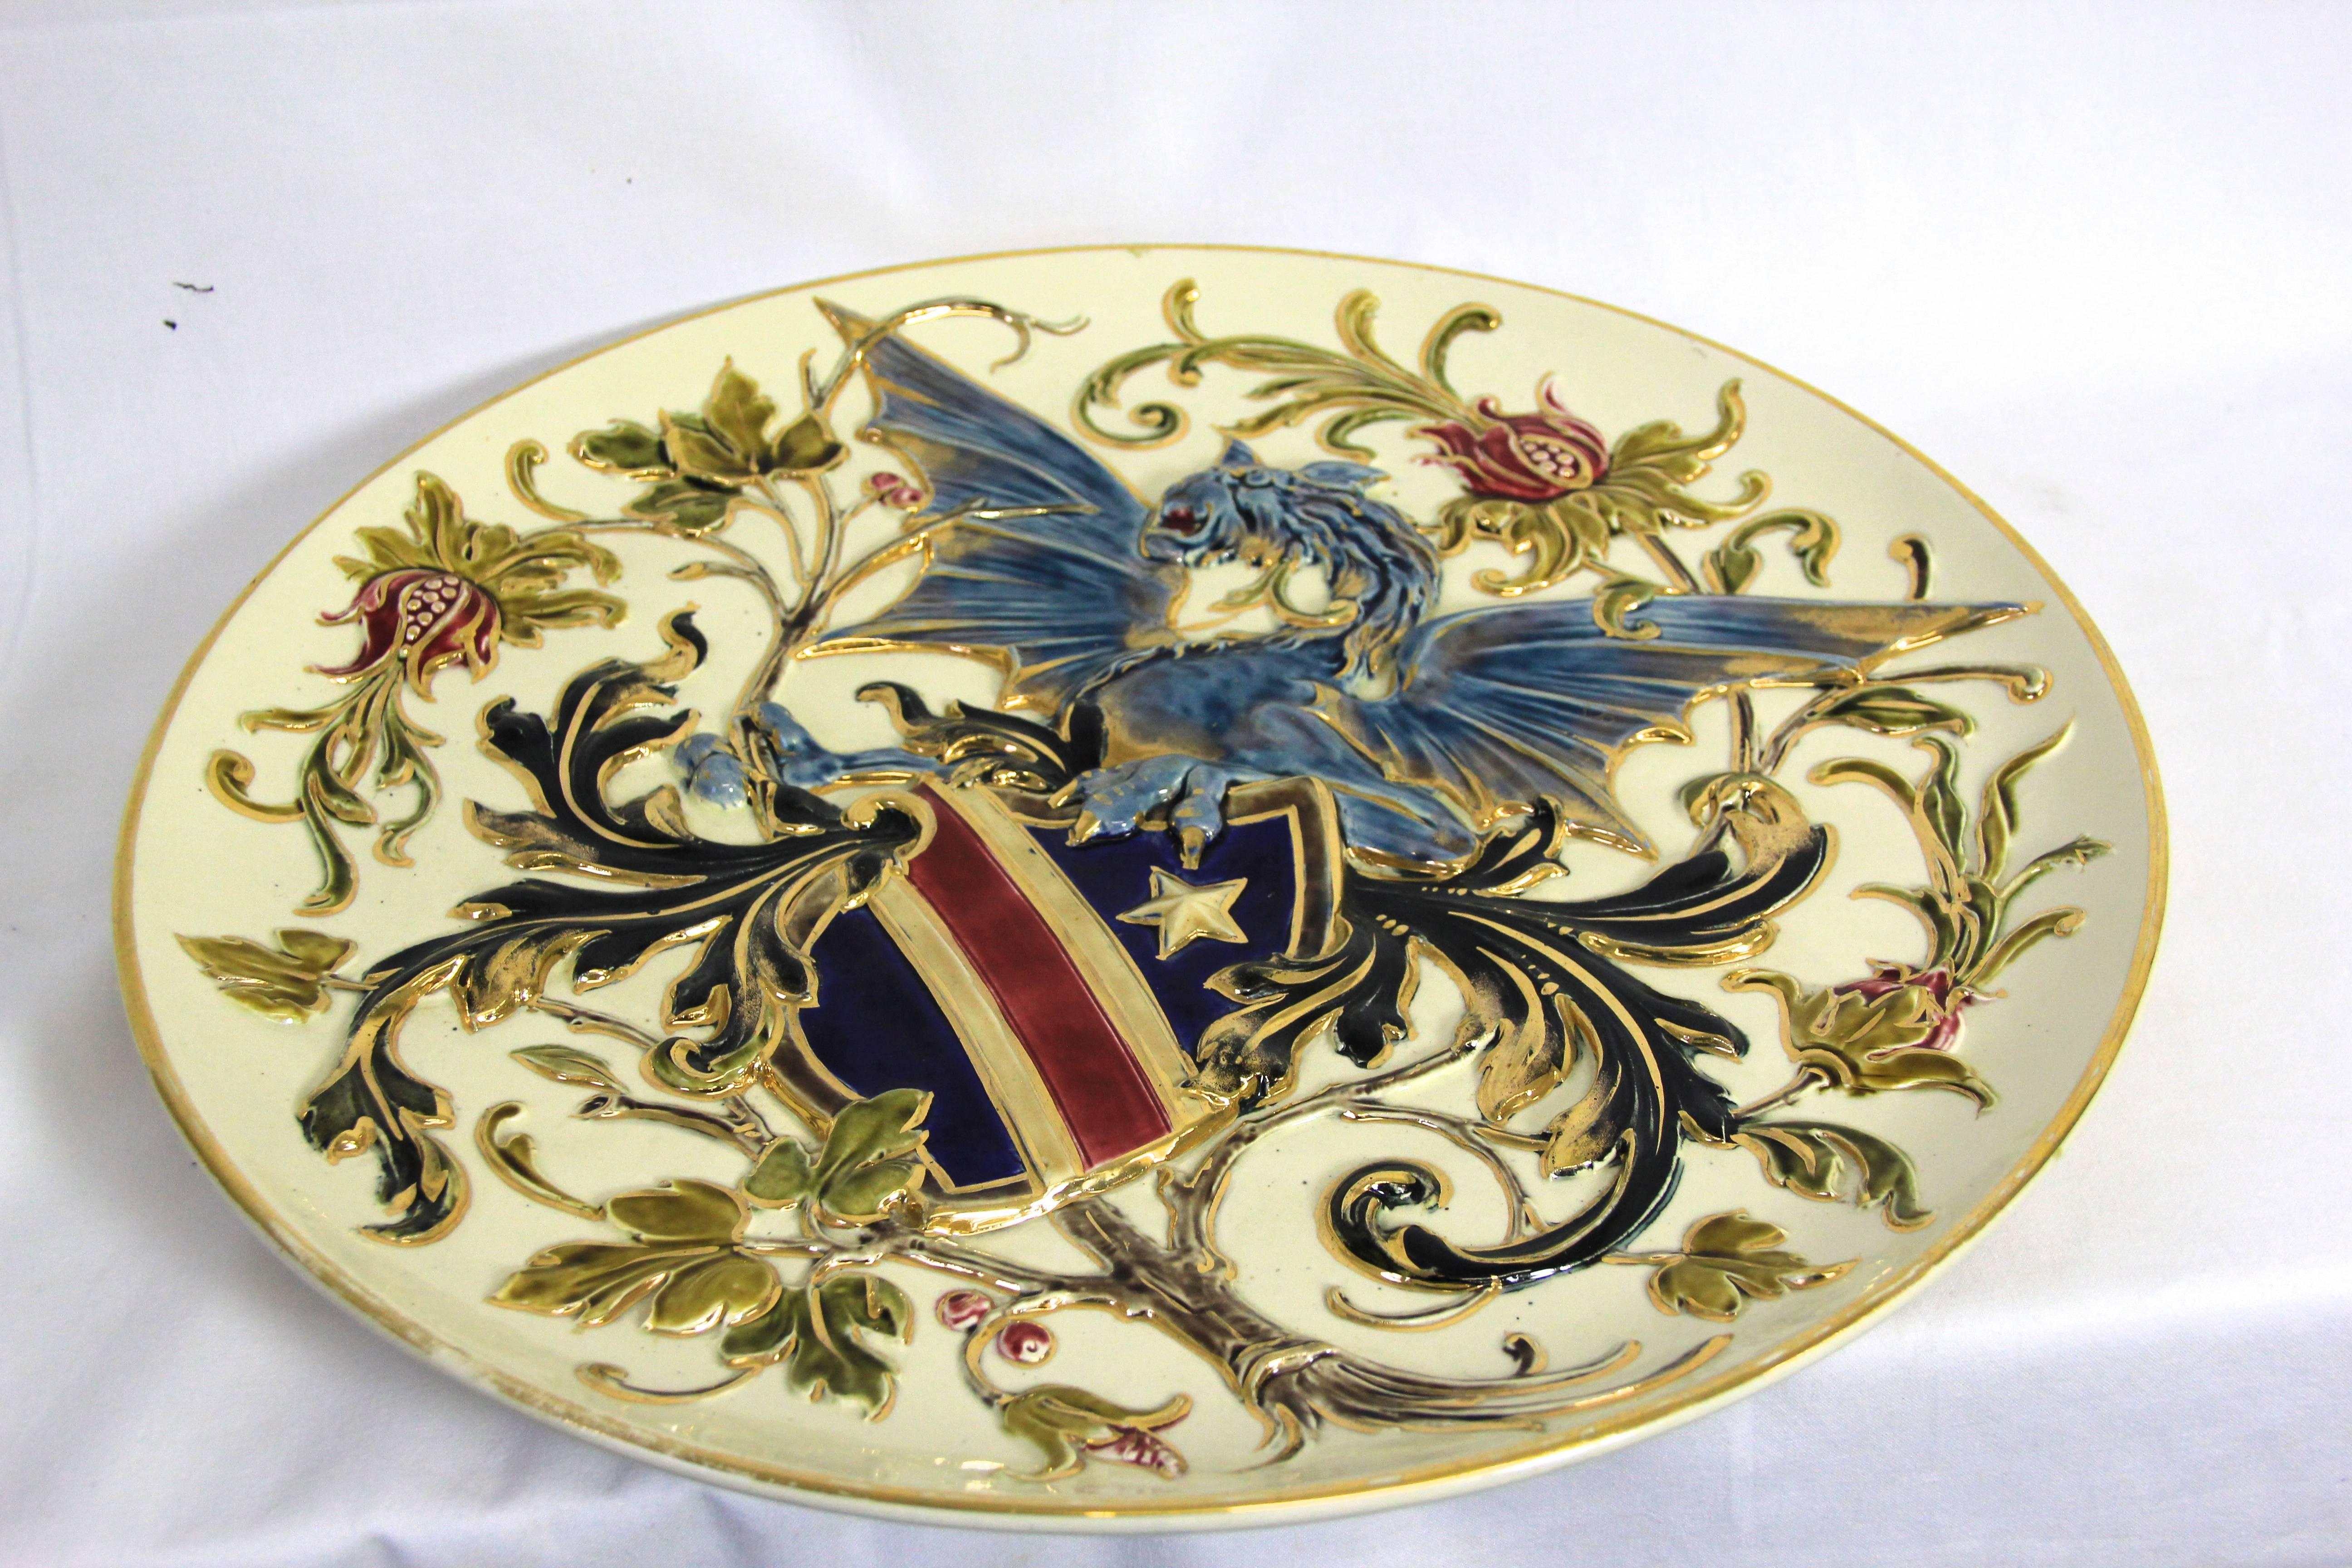 Large majestic wall plate decorated with a blue dragon and floral design in relief. The early Art Nouveau Majolica plate was painted in impressive colors to make it a perfect wall decoration. On the bottom there is an unreadable hallmark but it can